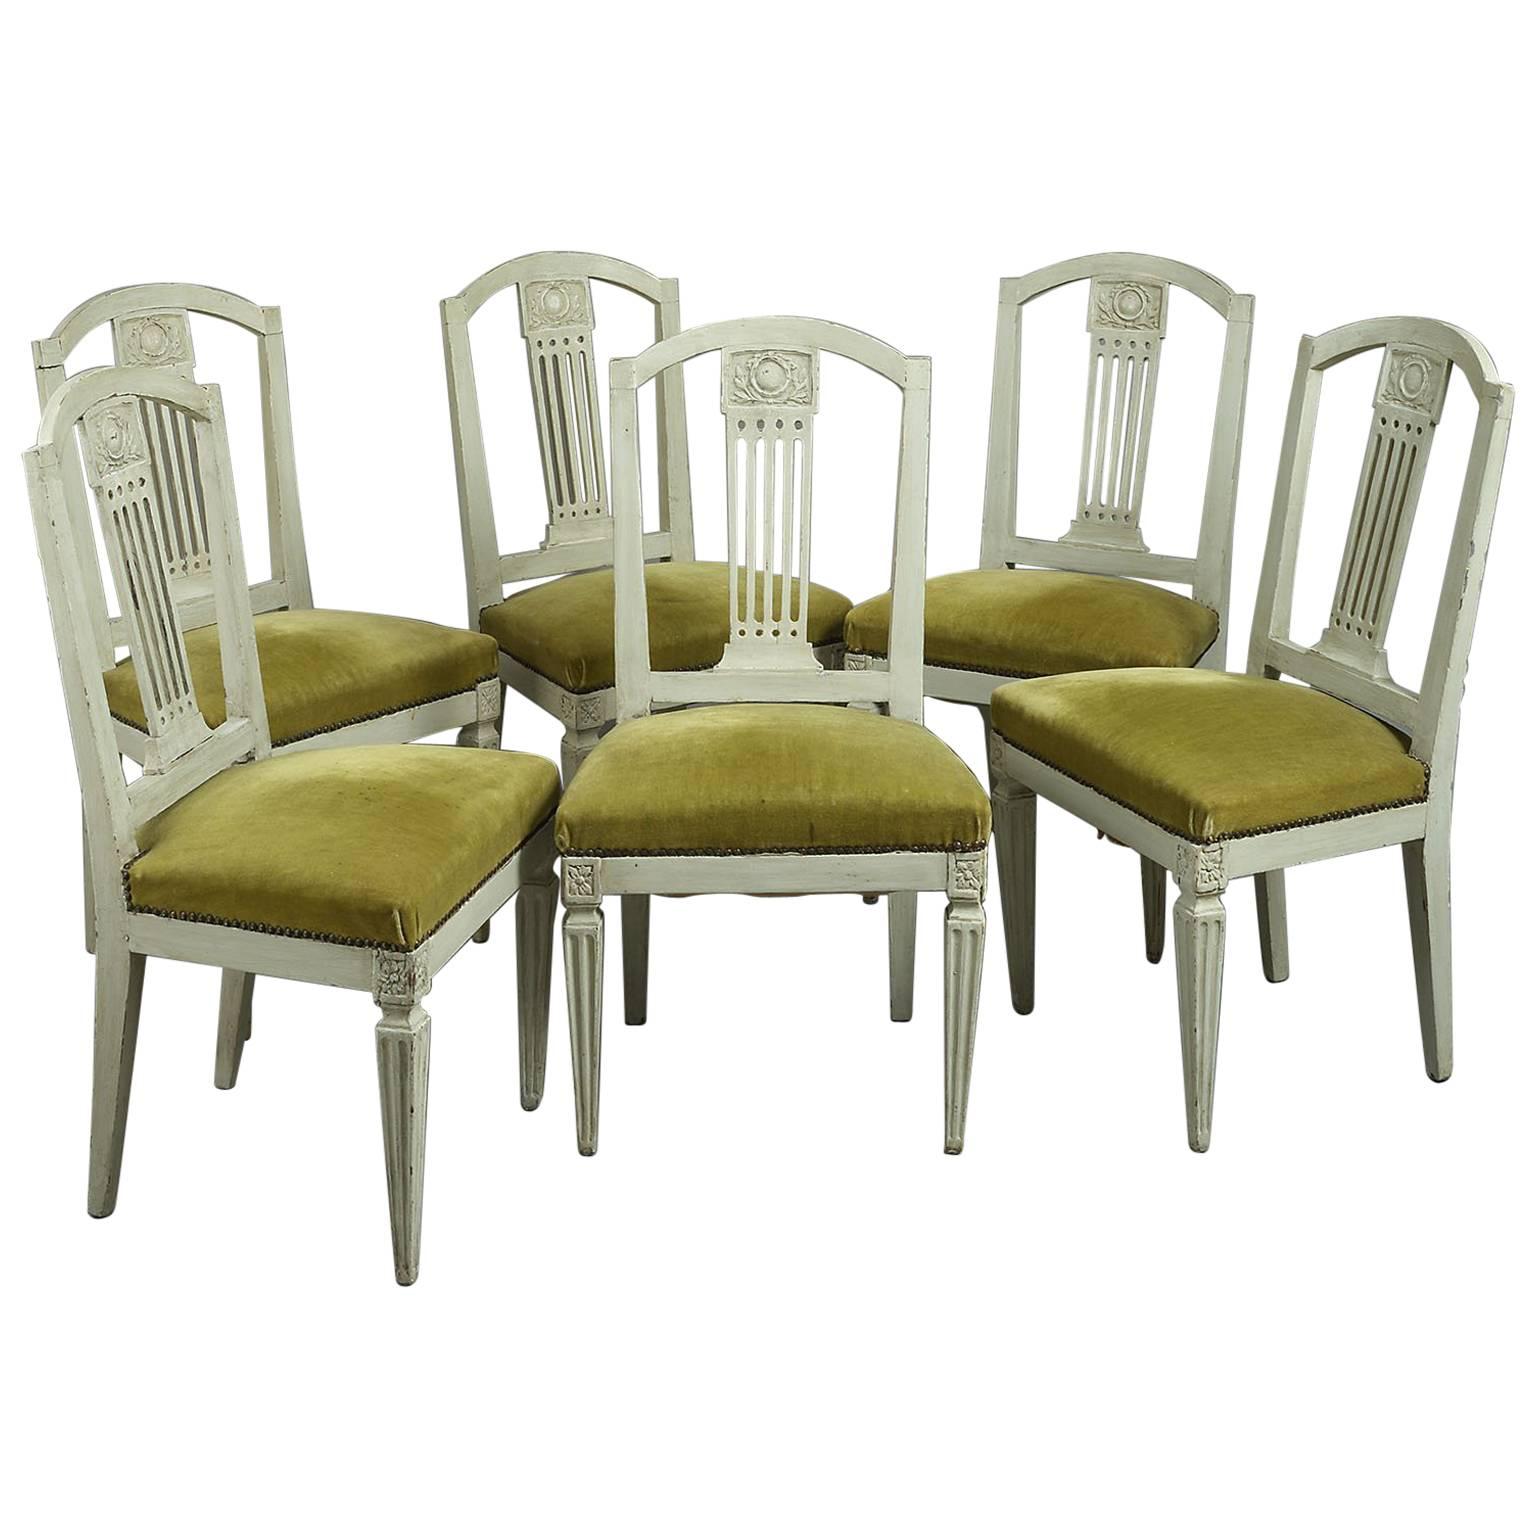 Set of Six 18th Century Dutch Painted Chairs For Sale